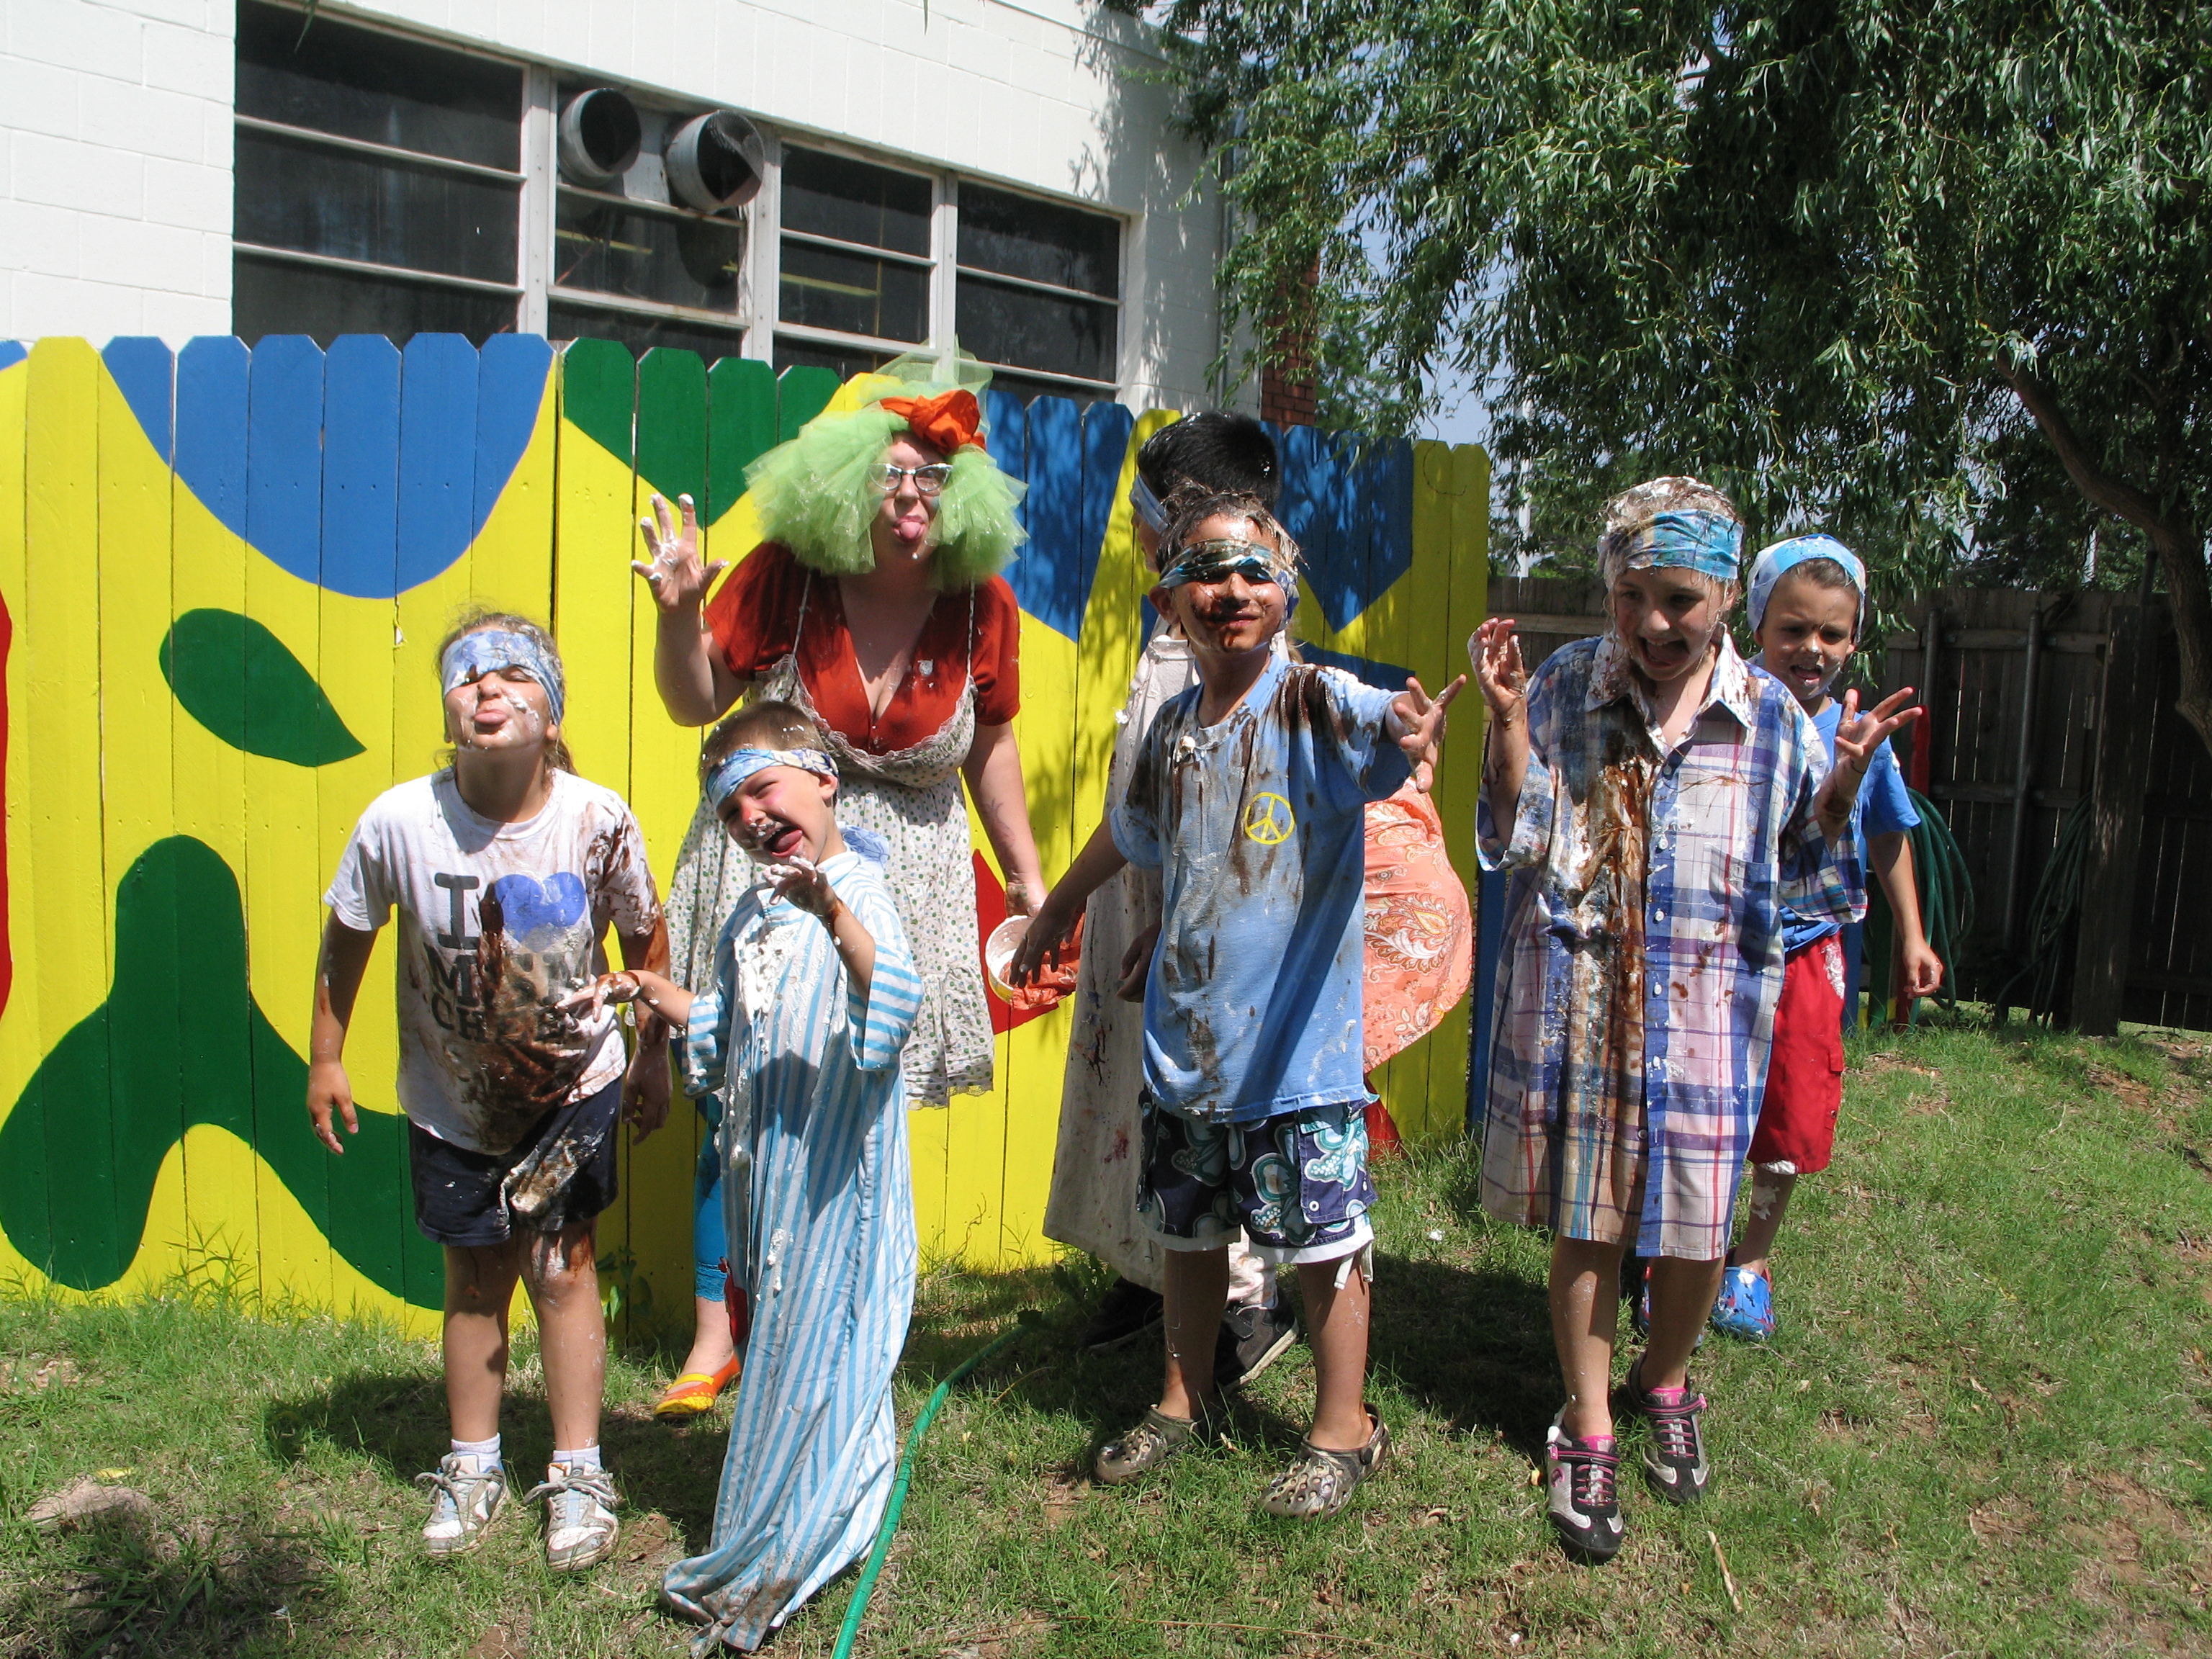 Kids stand in front of a yellow painted fence, covered in chocolate and whipped cream with bandana's on their foreheads, making silly faces. Behind them stands a person in green hair with a big red bow, sticking their tongue out.